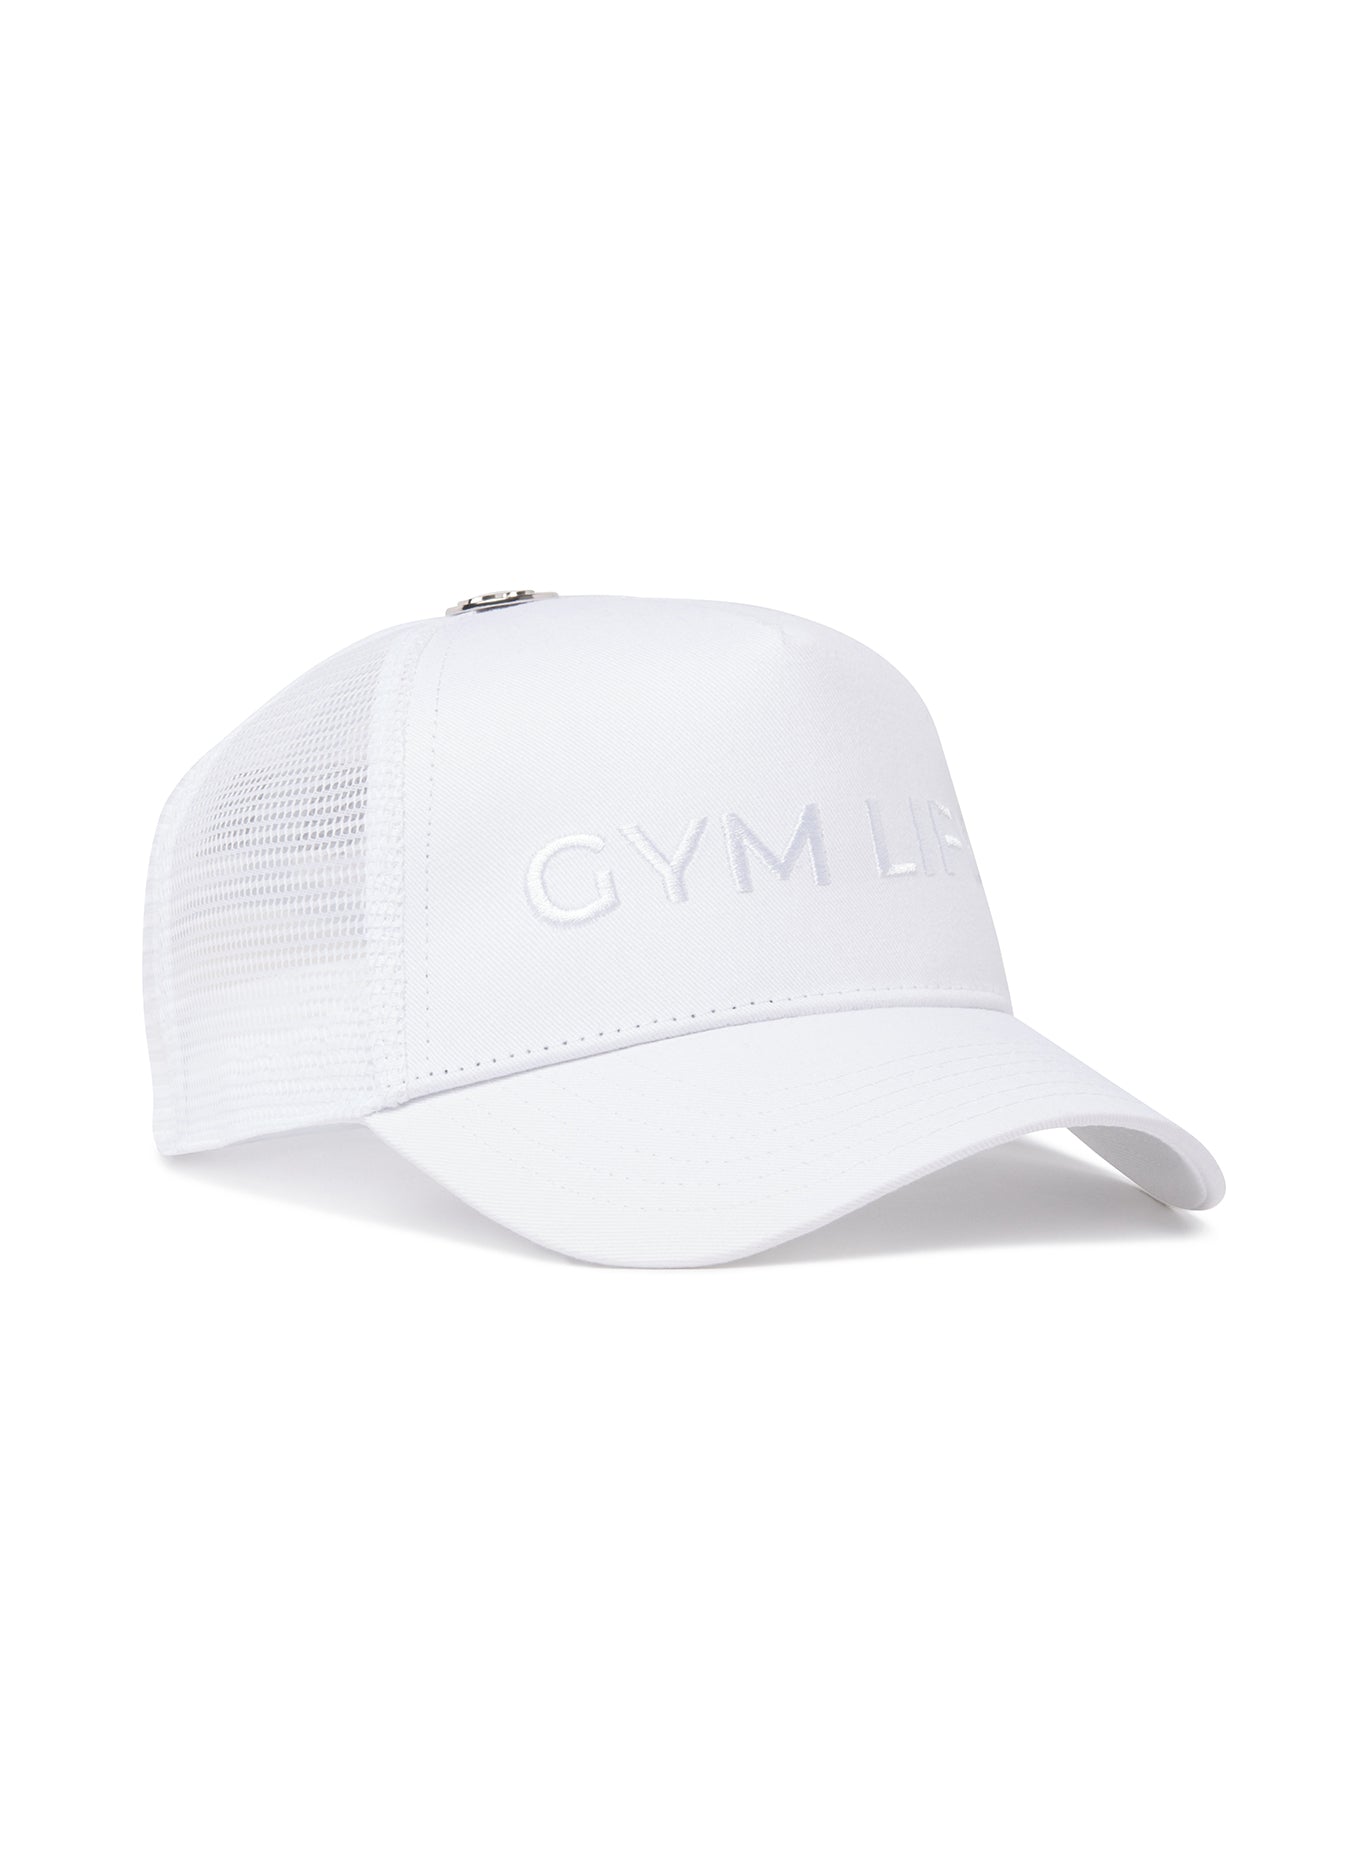 gym life hat - colorgroup